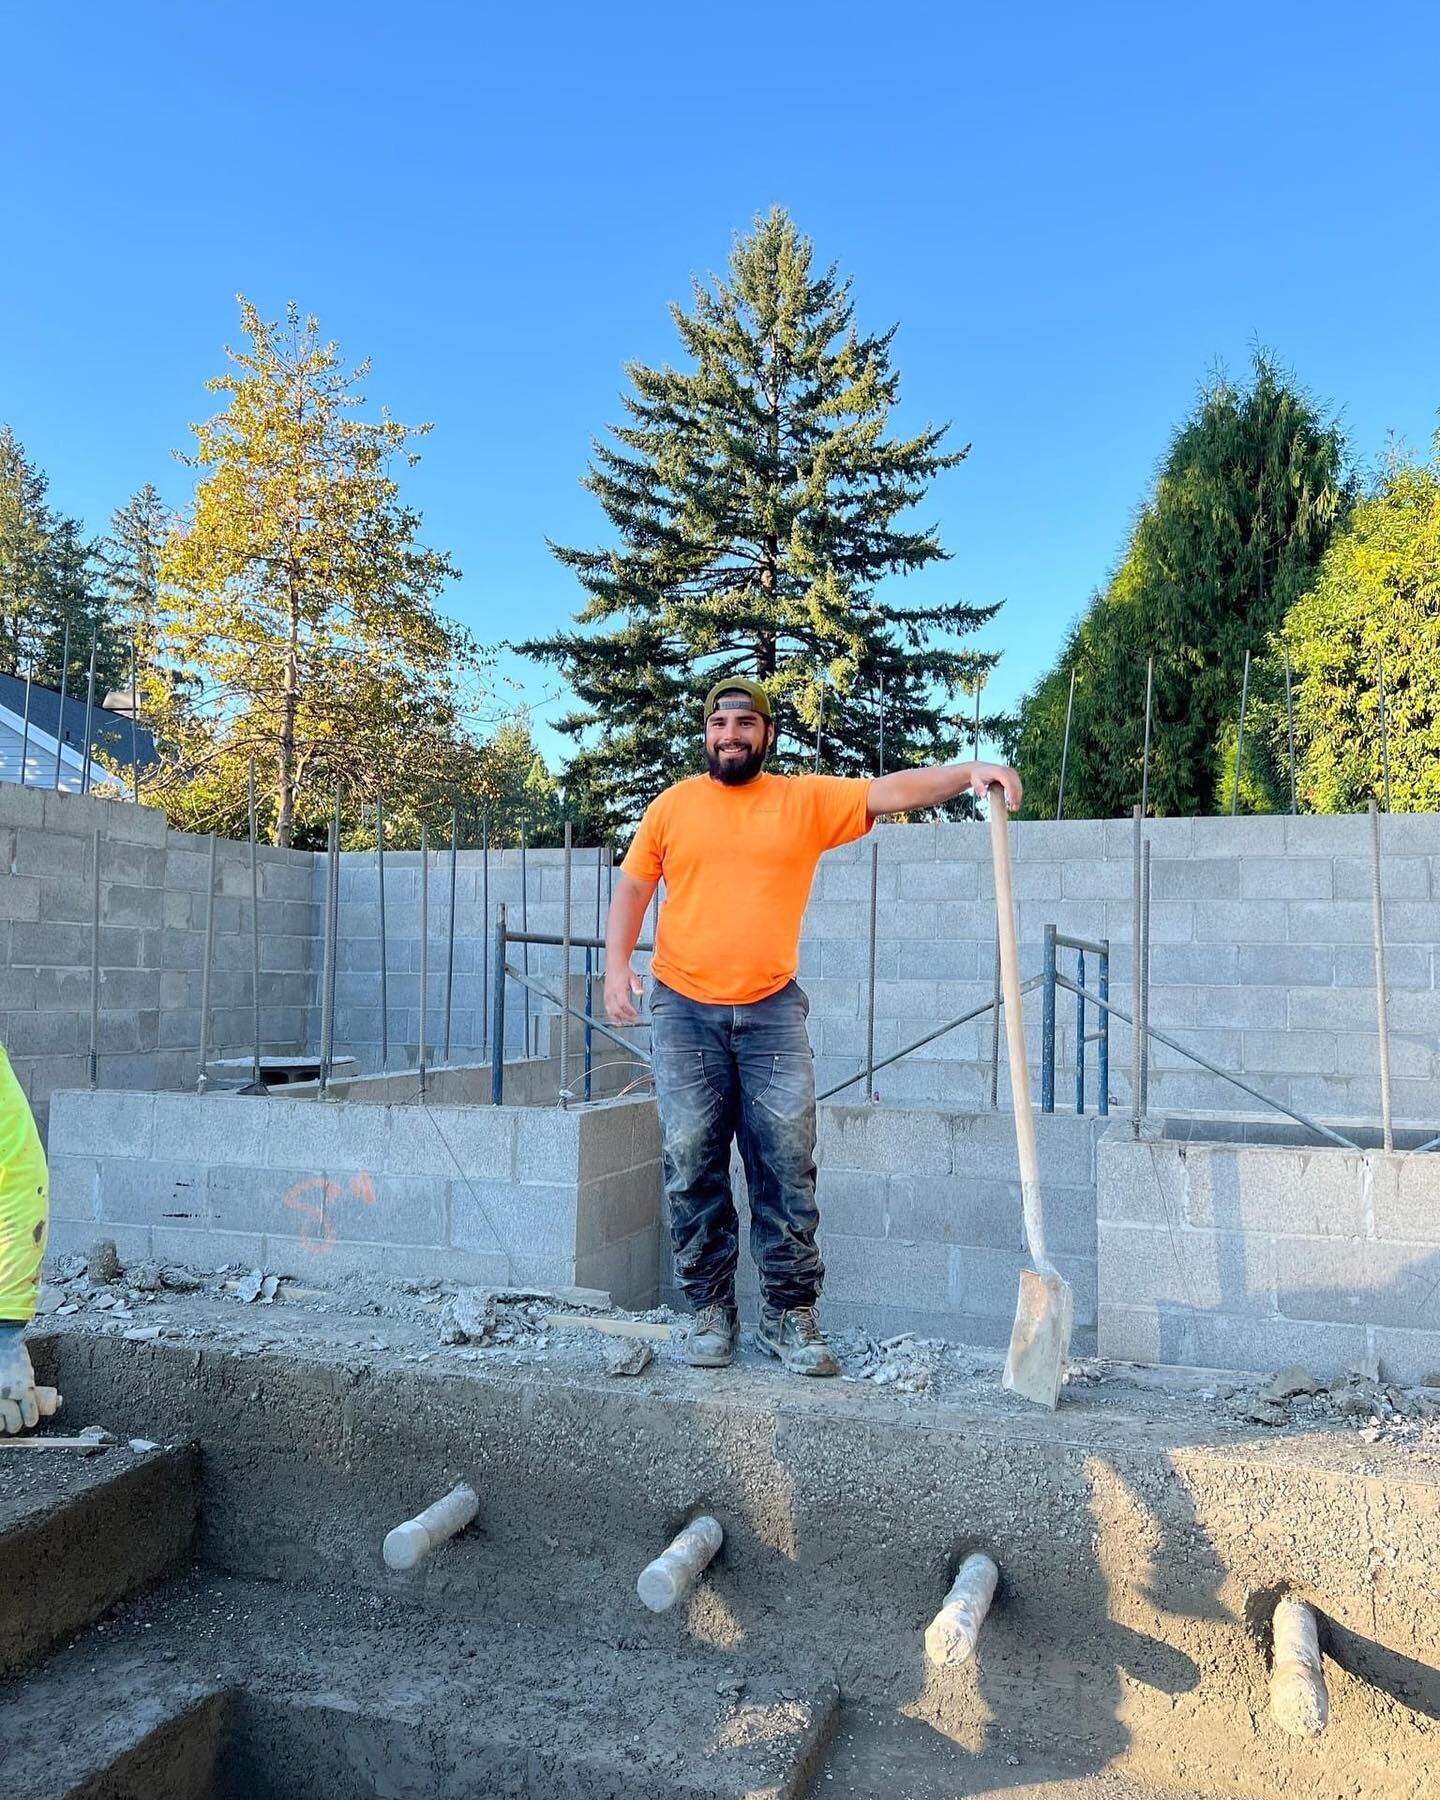 Shotcrete day for the spa at one of our residential projects. Pictured here is Freddy, a long-term, top-notch team member and a demo, shotcrete, and plaster specialist. 

Shout out to Jackson Elsasser for the images of today's work!

#AndersonPoolwor